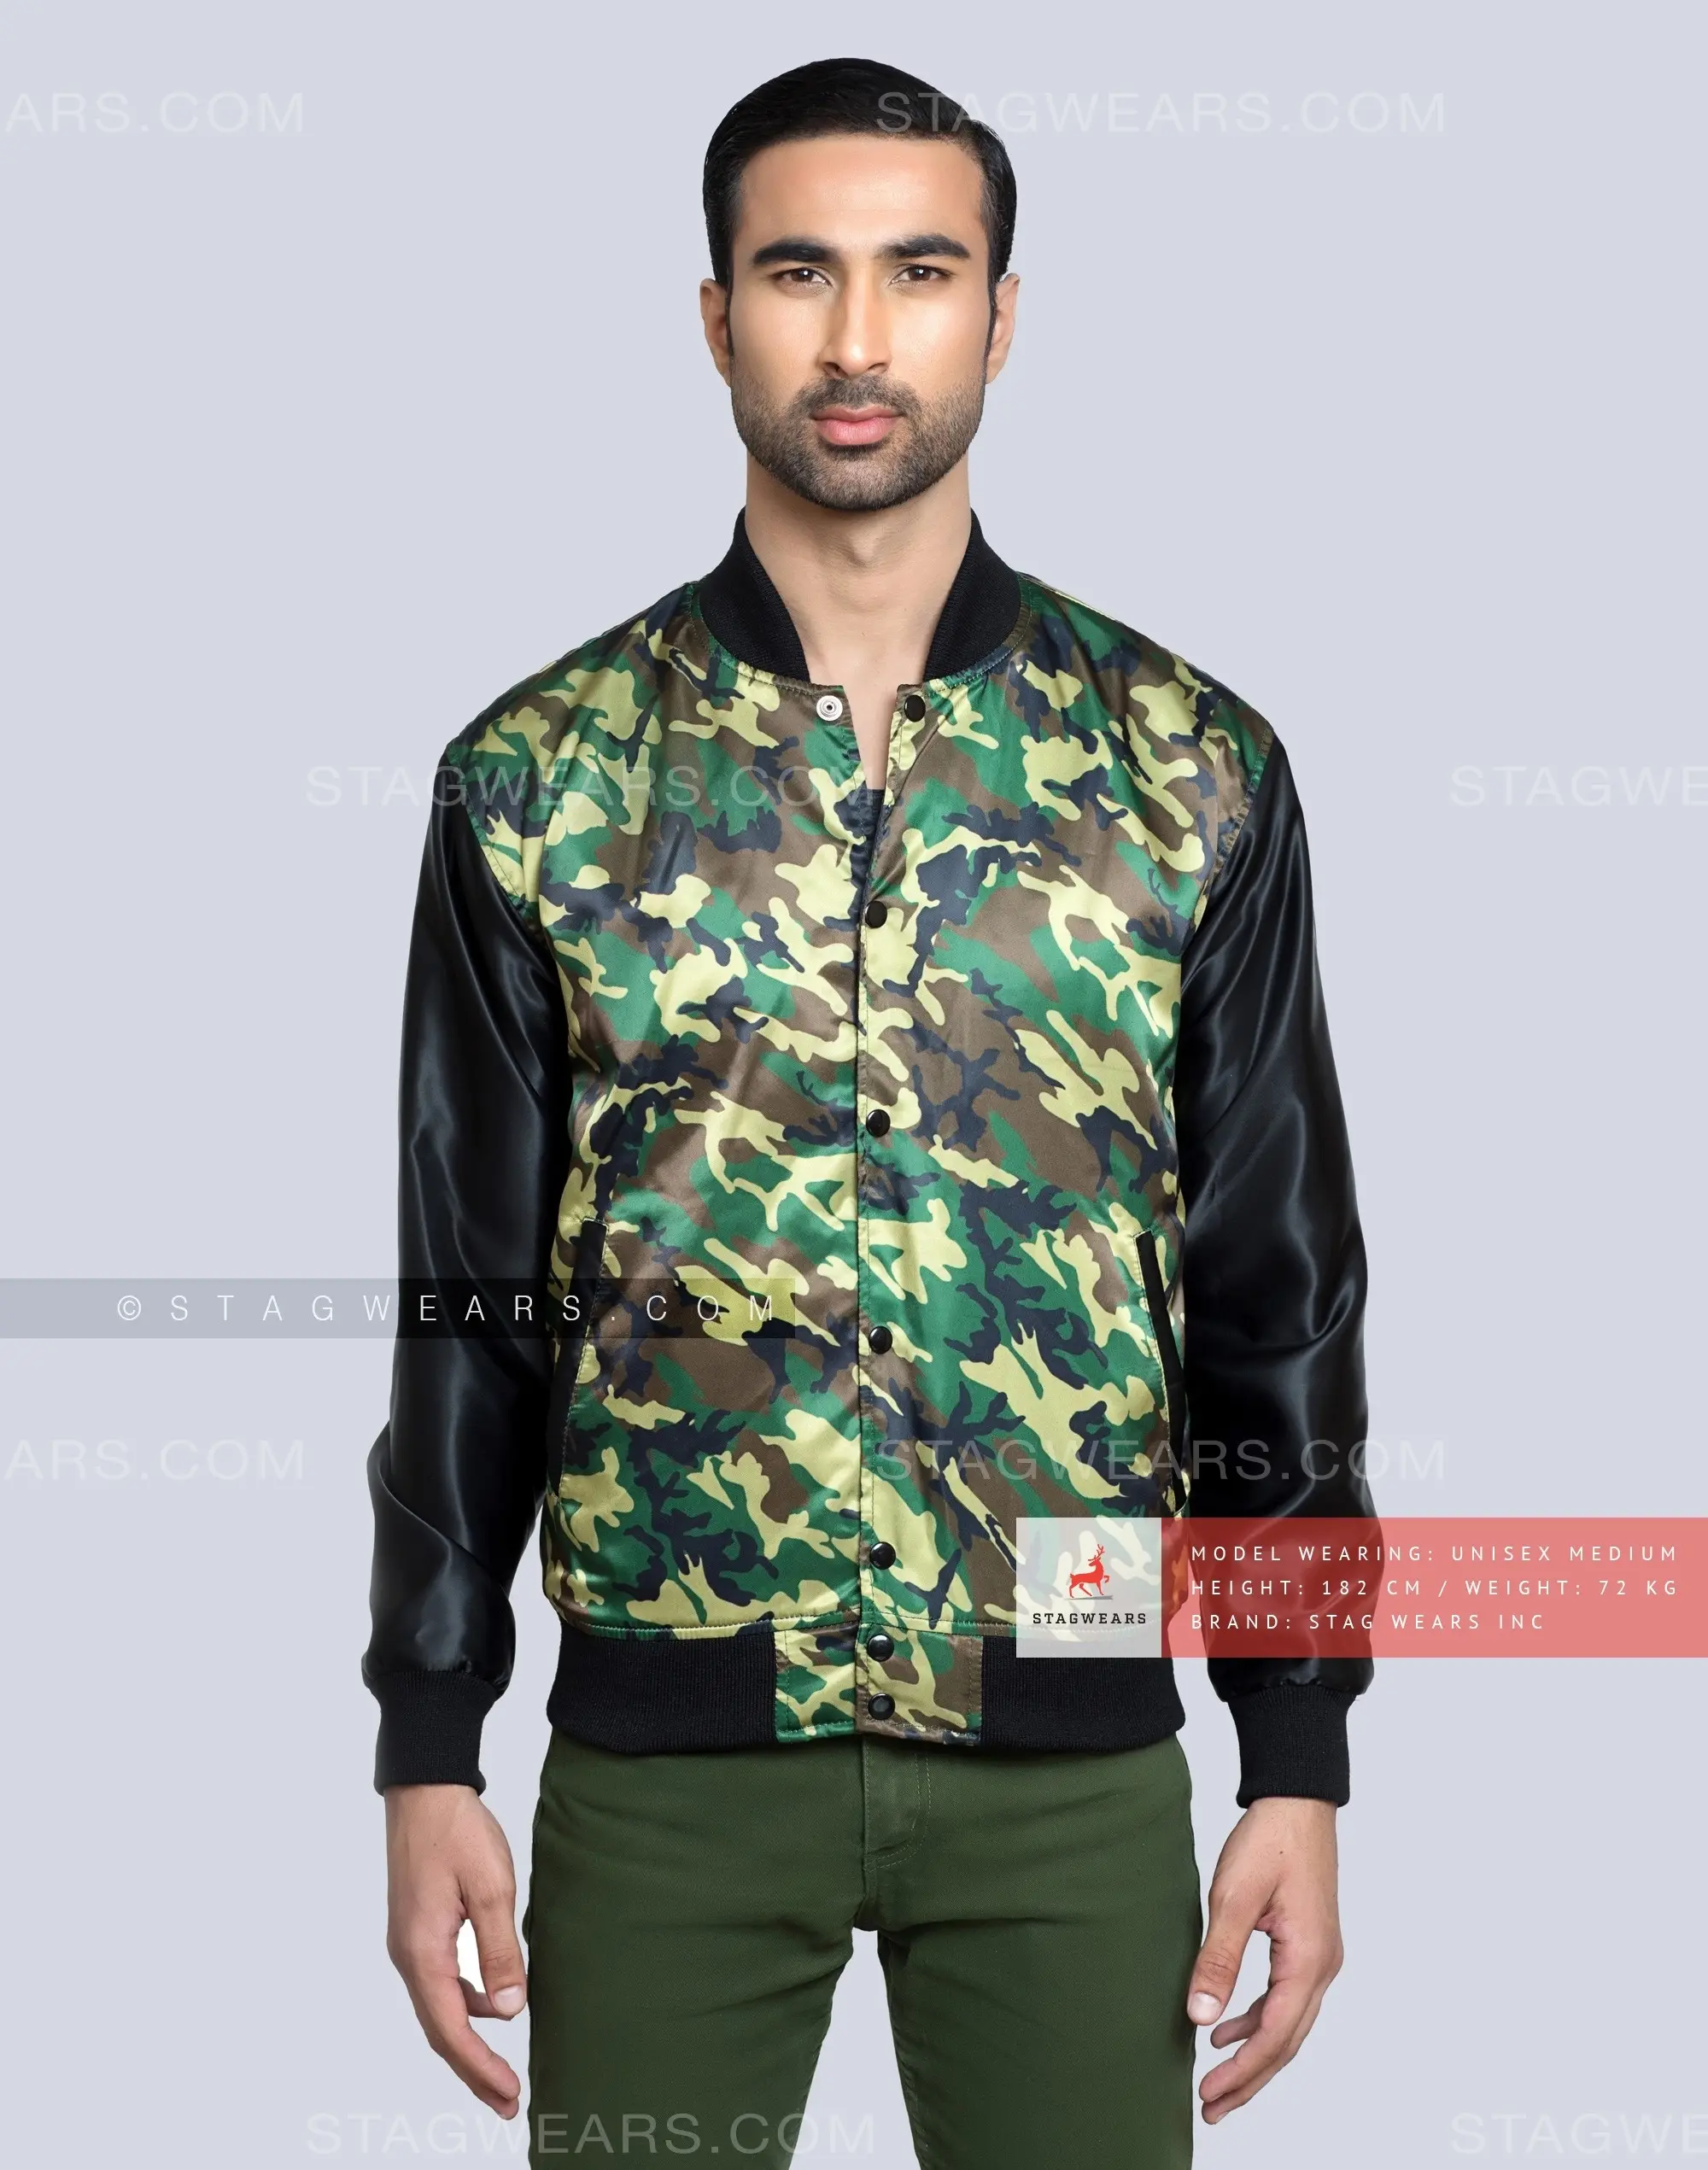 https://stagwears.com/shop_products_img/camouflage-satin-varsity-jacket/1_camouflage-satin-varsity-jacket-Front.webp